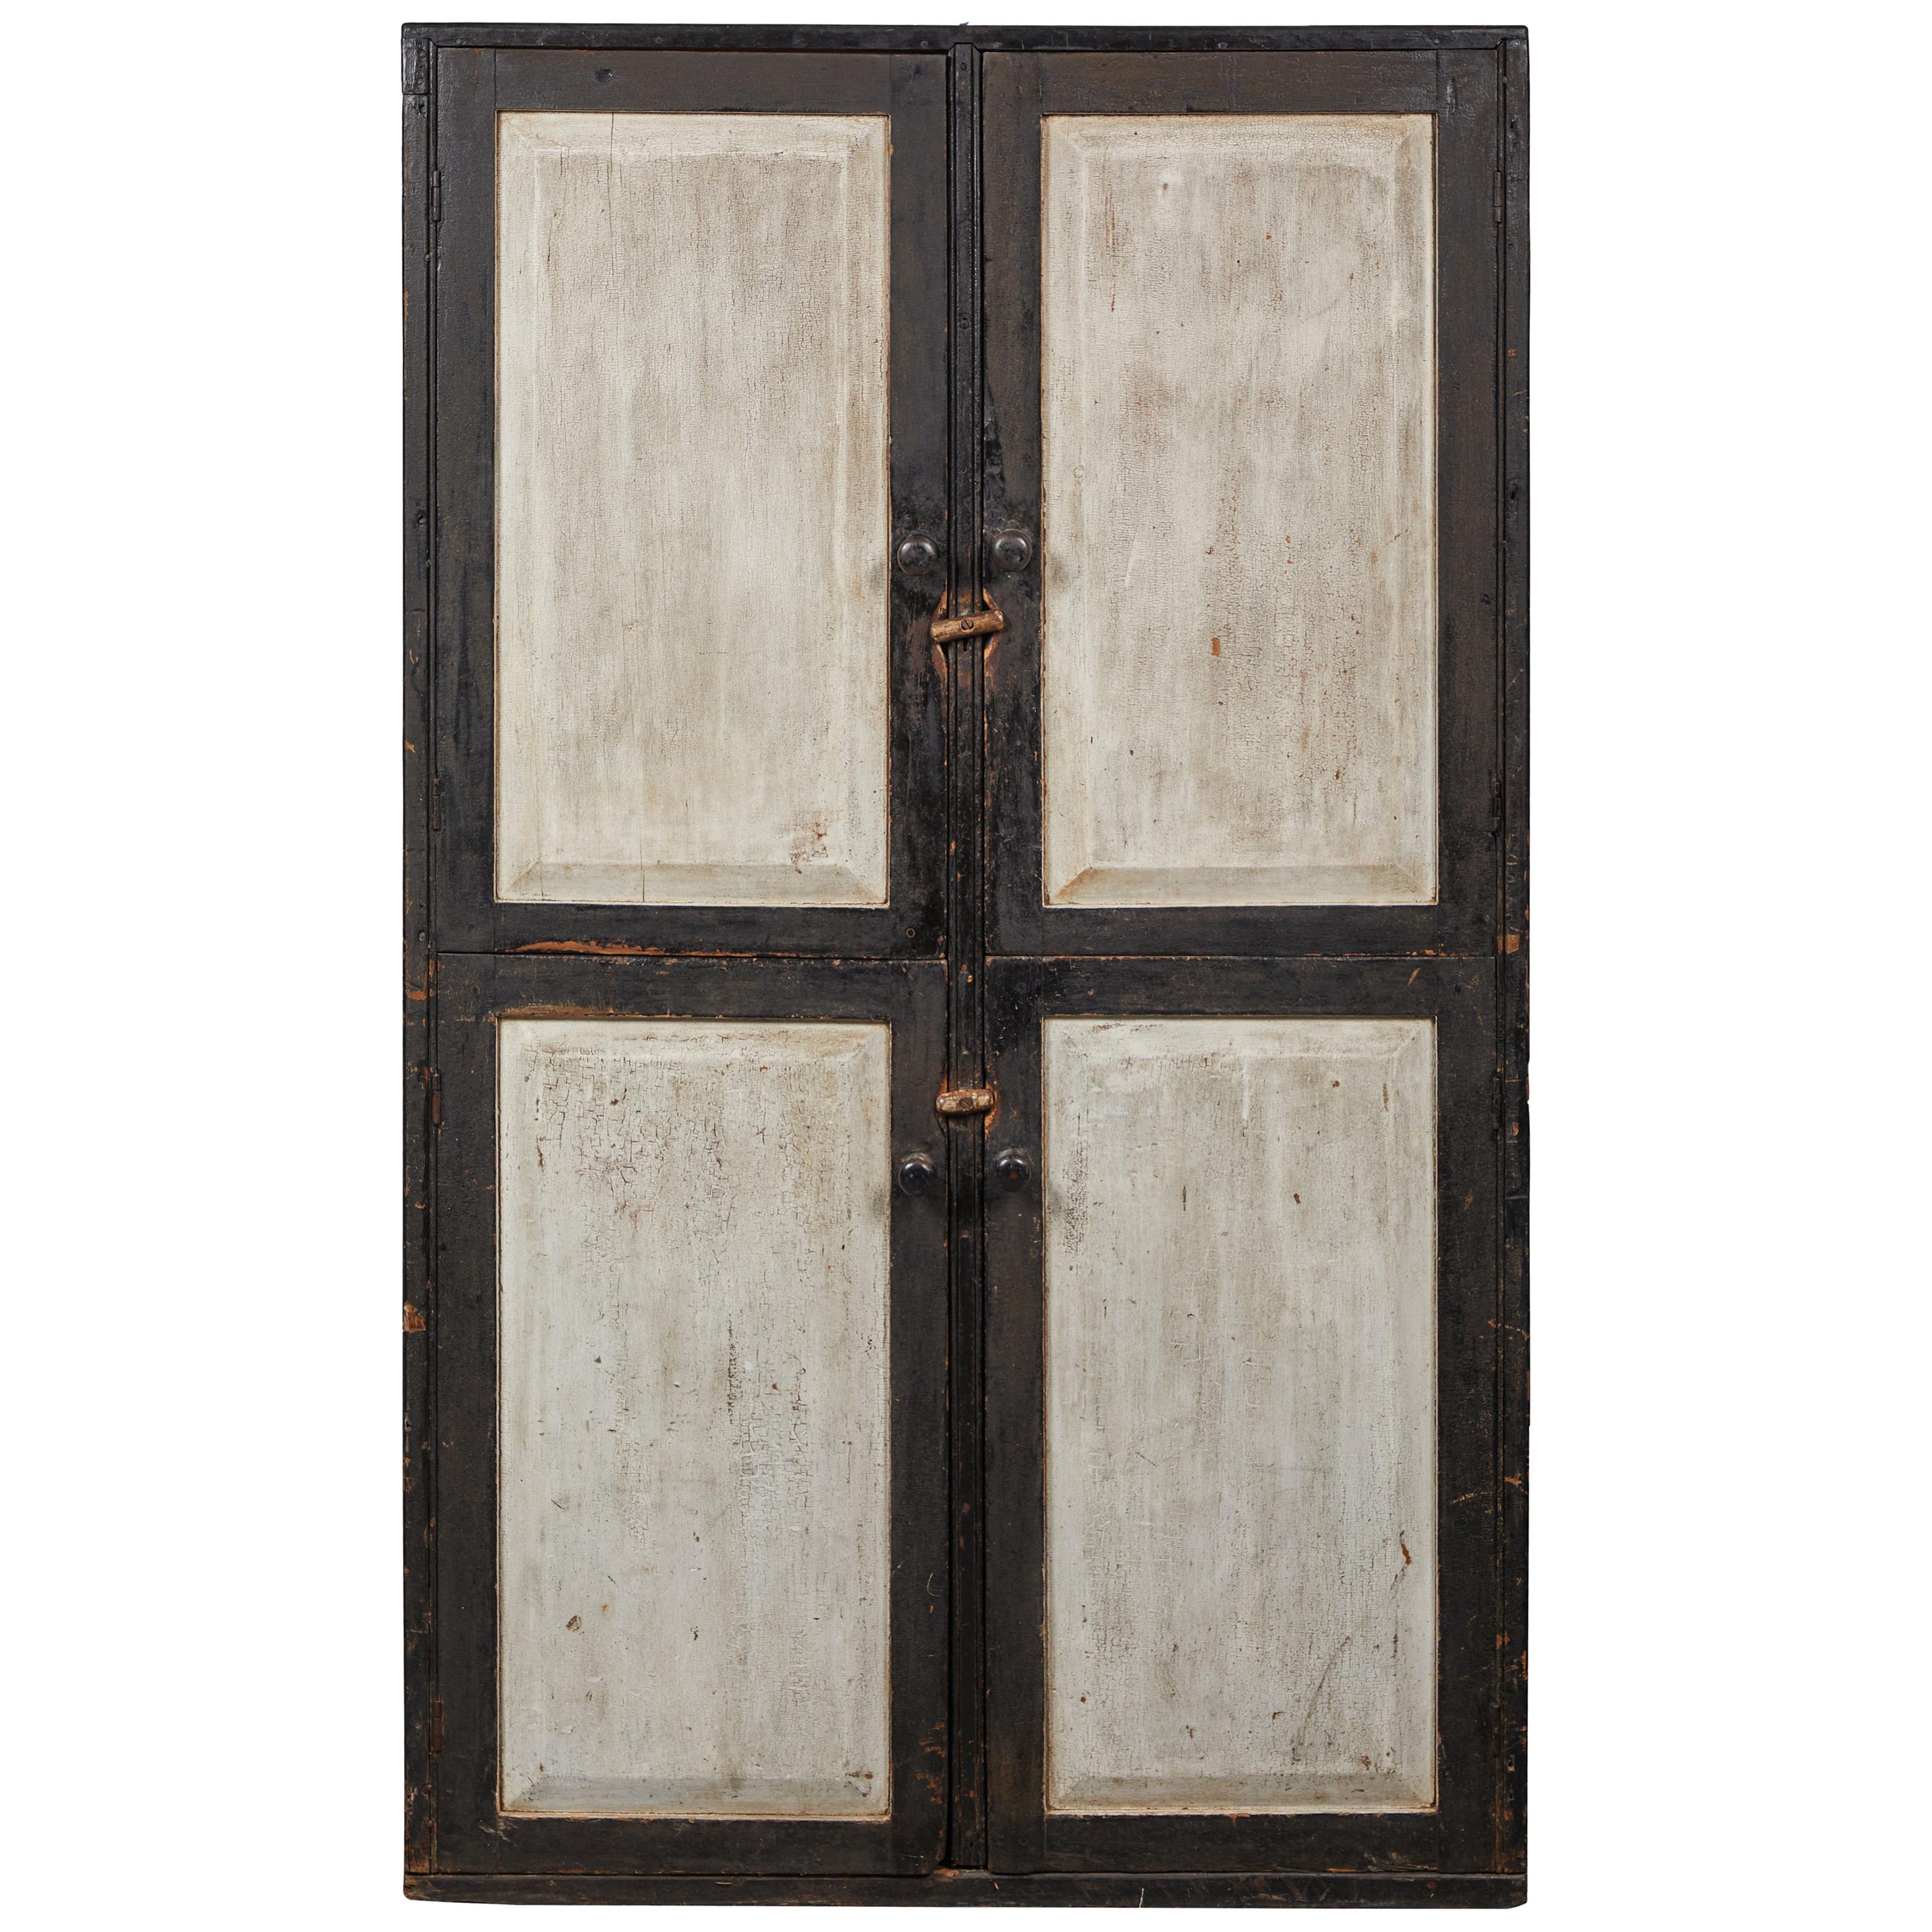 Early American Rustic Black and White Four-Door Cabinet